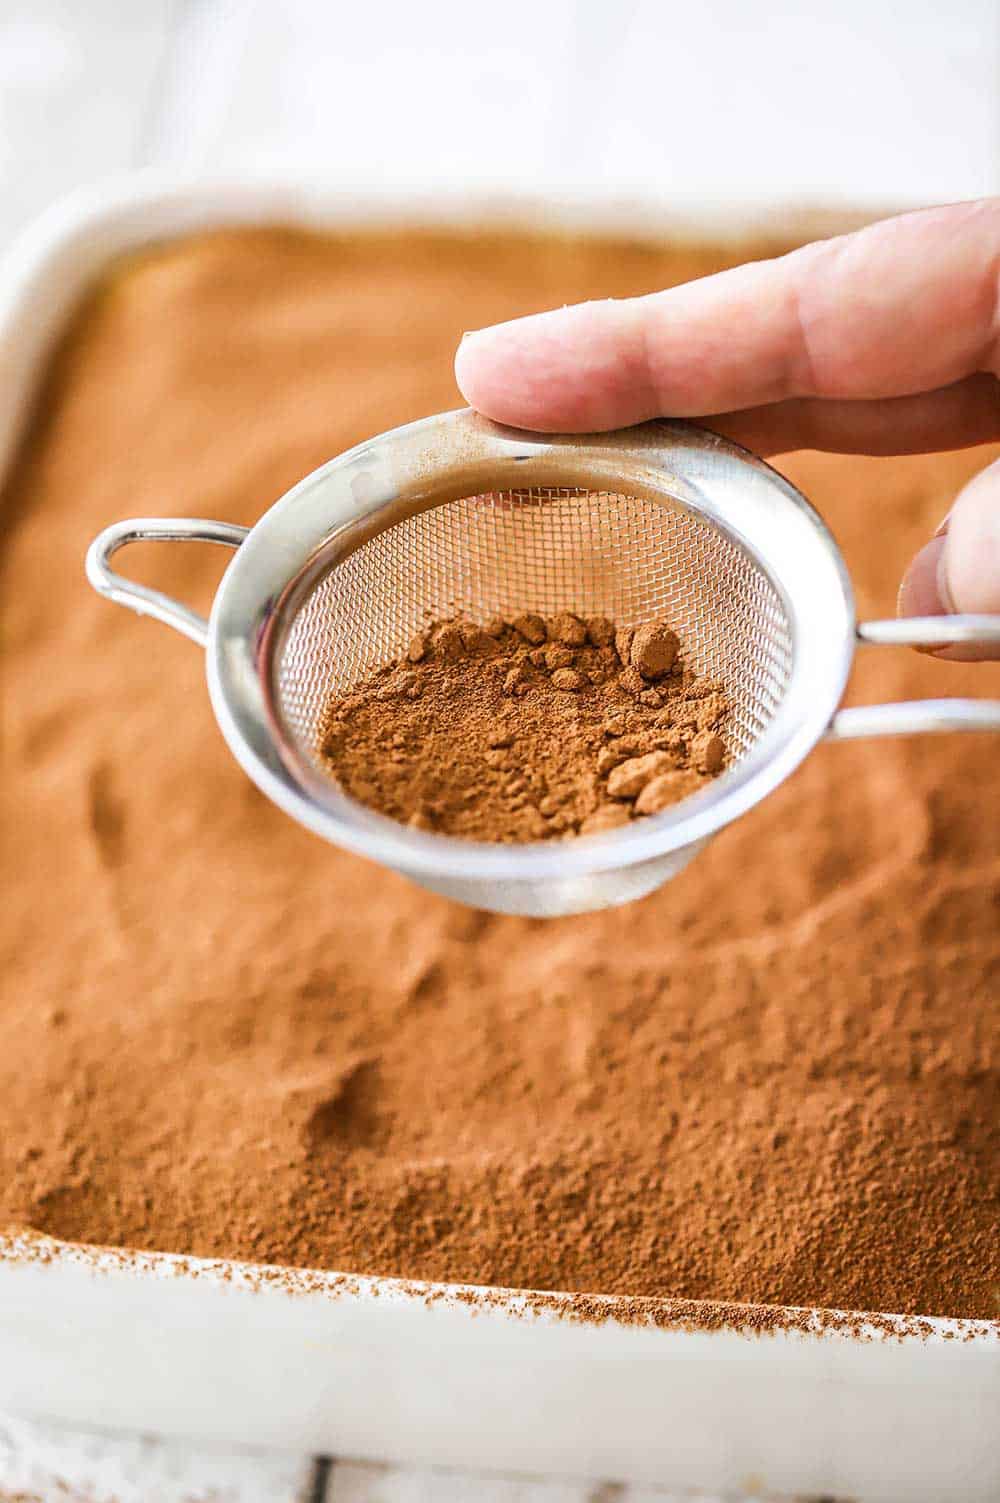 A hand tapping the side of a small sieve filled with chocolate powder over a casserole dish filled with tiramisu.